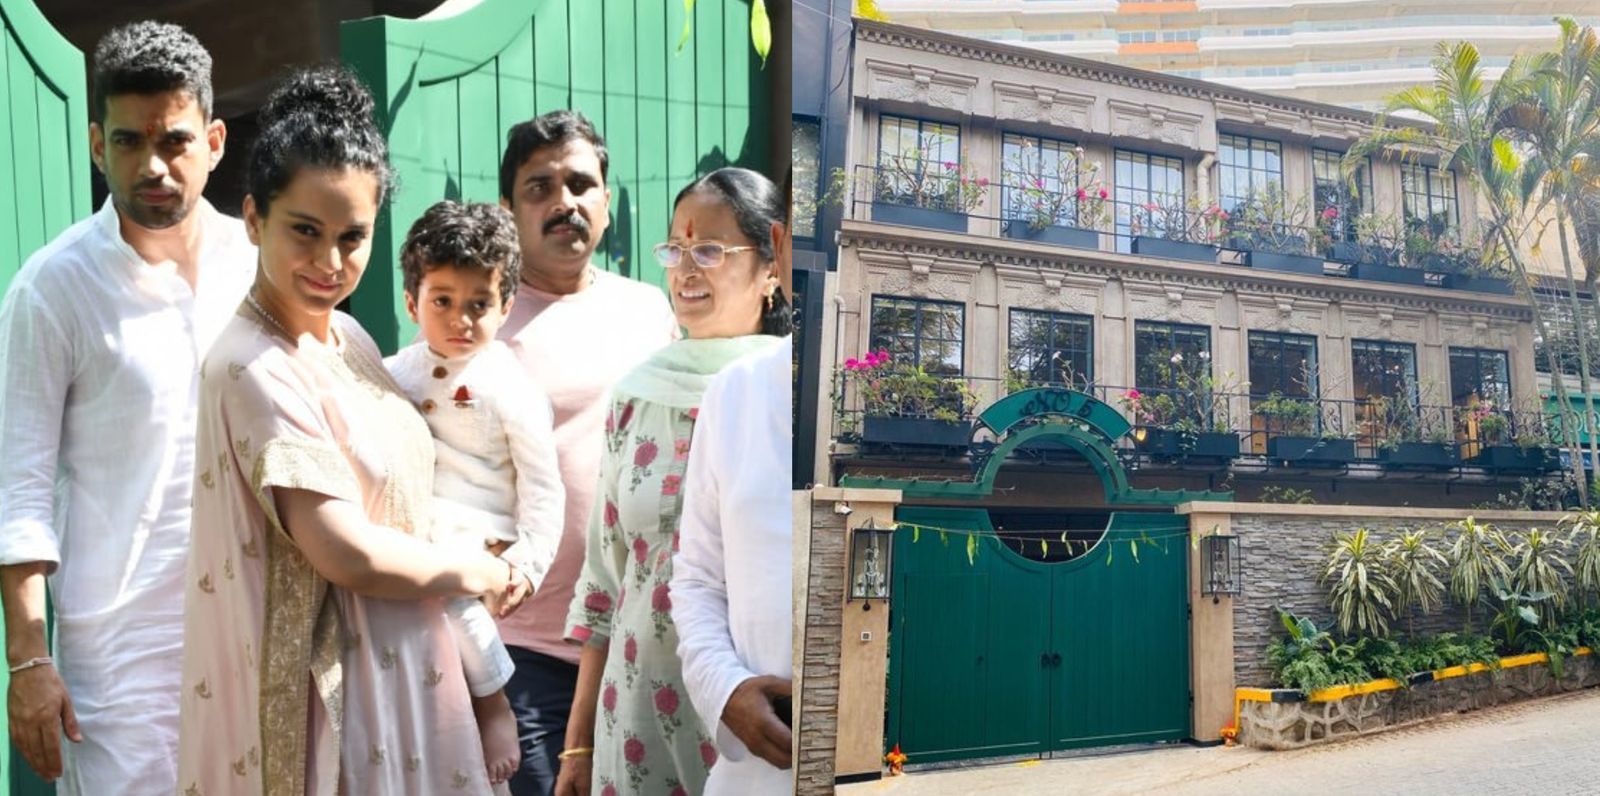 Kangana Ranaut’s Sister Rangoli Chandel Shares Picture Of Her Pali Hill Studio, Says She ‘Never Danced In Wedding Or Awards’ For This!